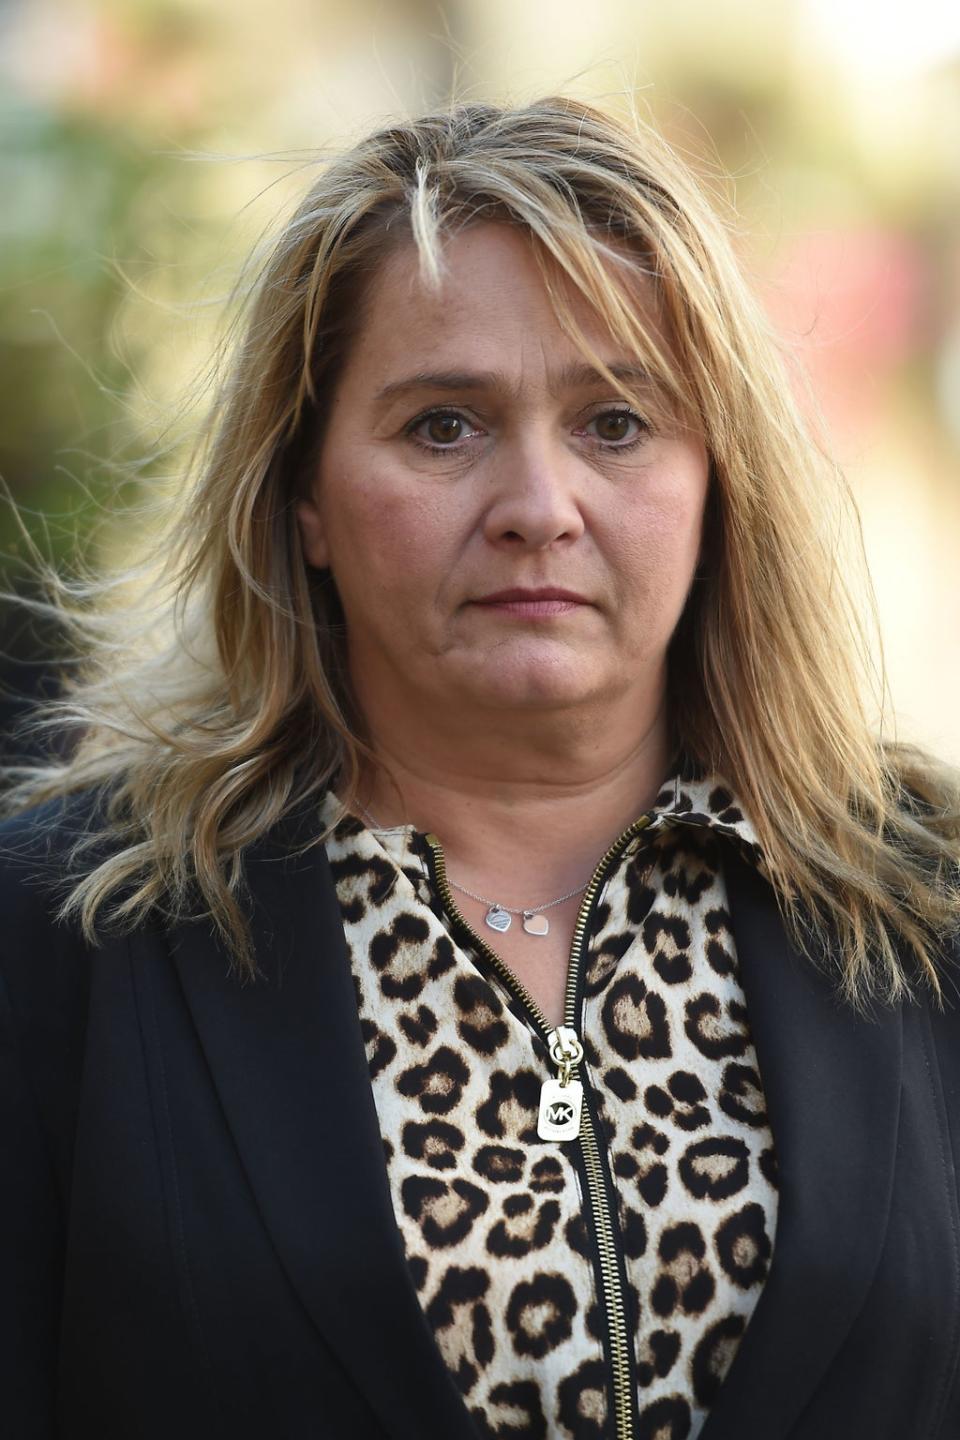 Nicola Urquhart, the mother of Corrie McKeague, gave evidence via a statement (Joe Giddens/PA) (PA Archive)